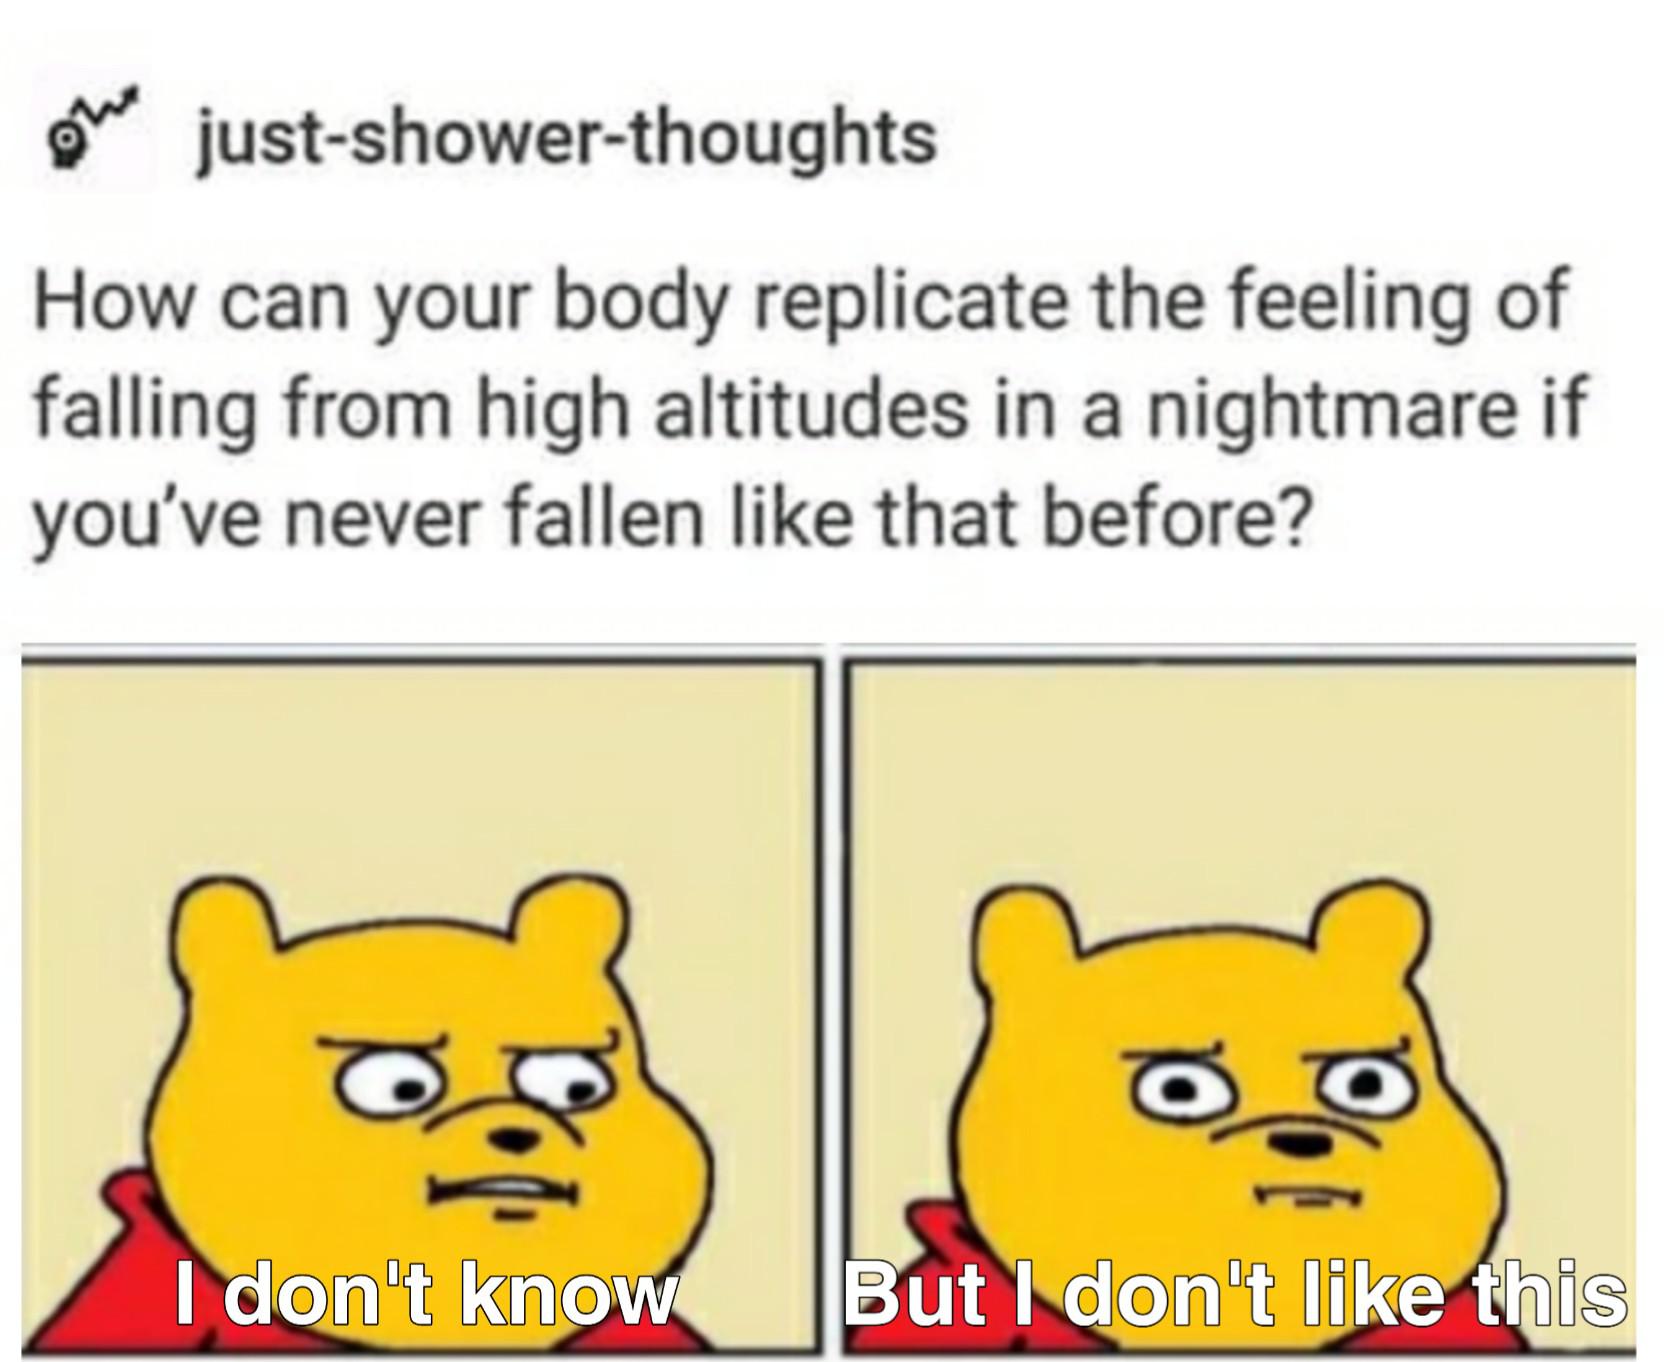 Funny, VR other memes Funny, VR text: 9 just-shower-thoughts How can your body replicate the feeling of falling from high altitudes in a nightmare if you've never fallen like that before? I domtiköow But l*doNt like this 